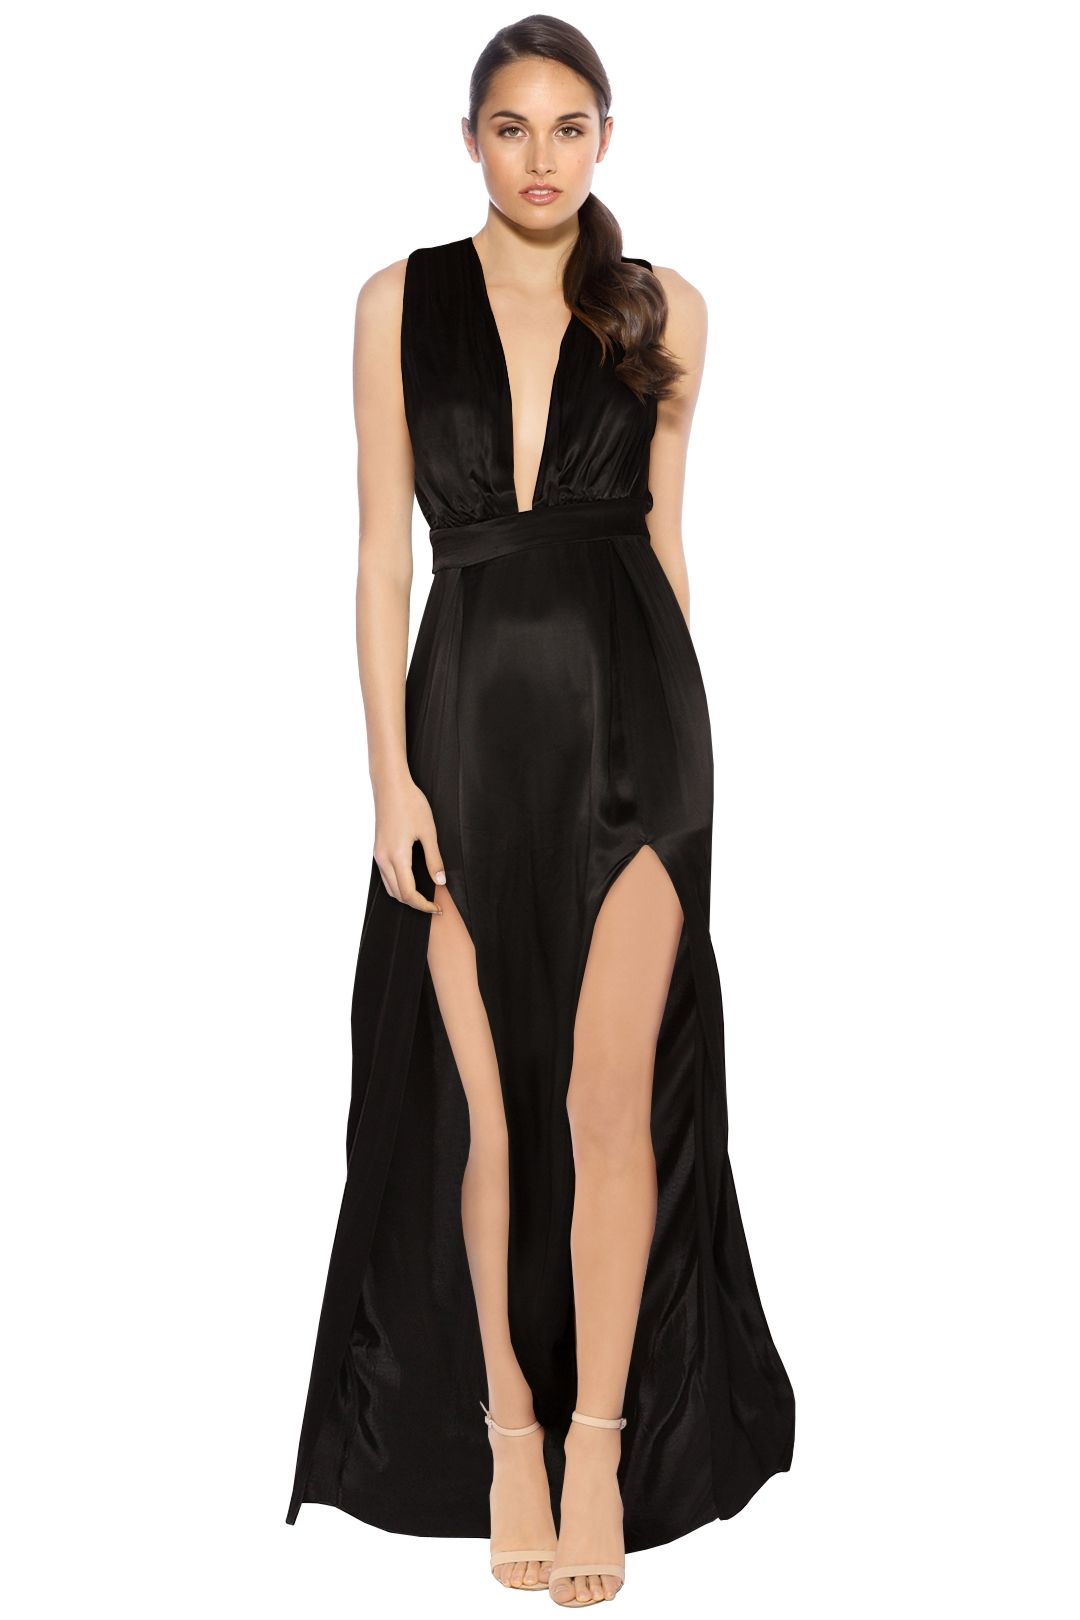 Lovers & Friends - Naoli Gown - Black - Front